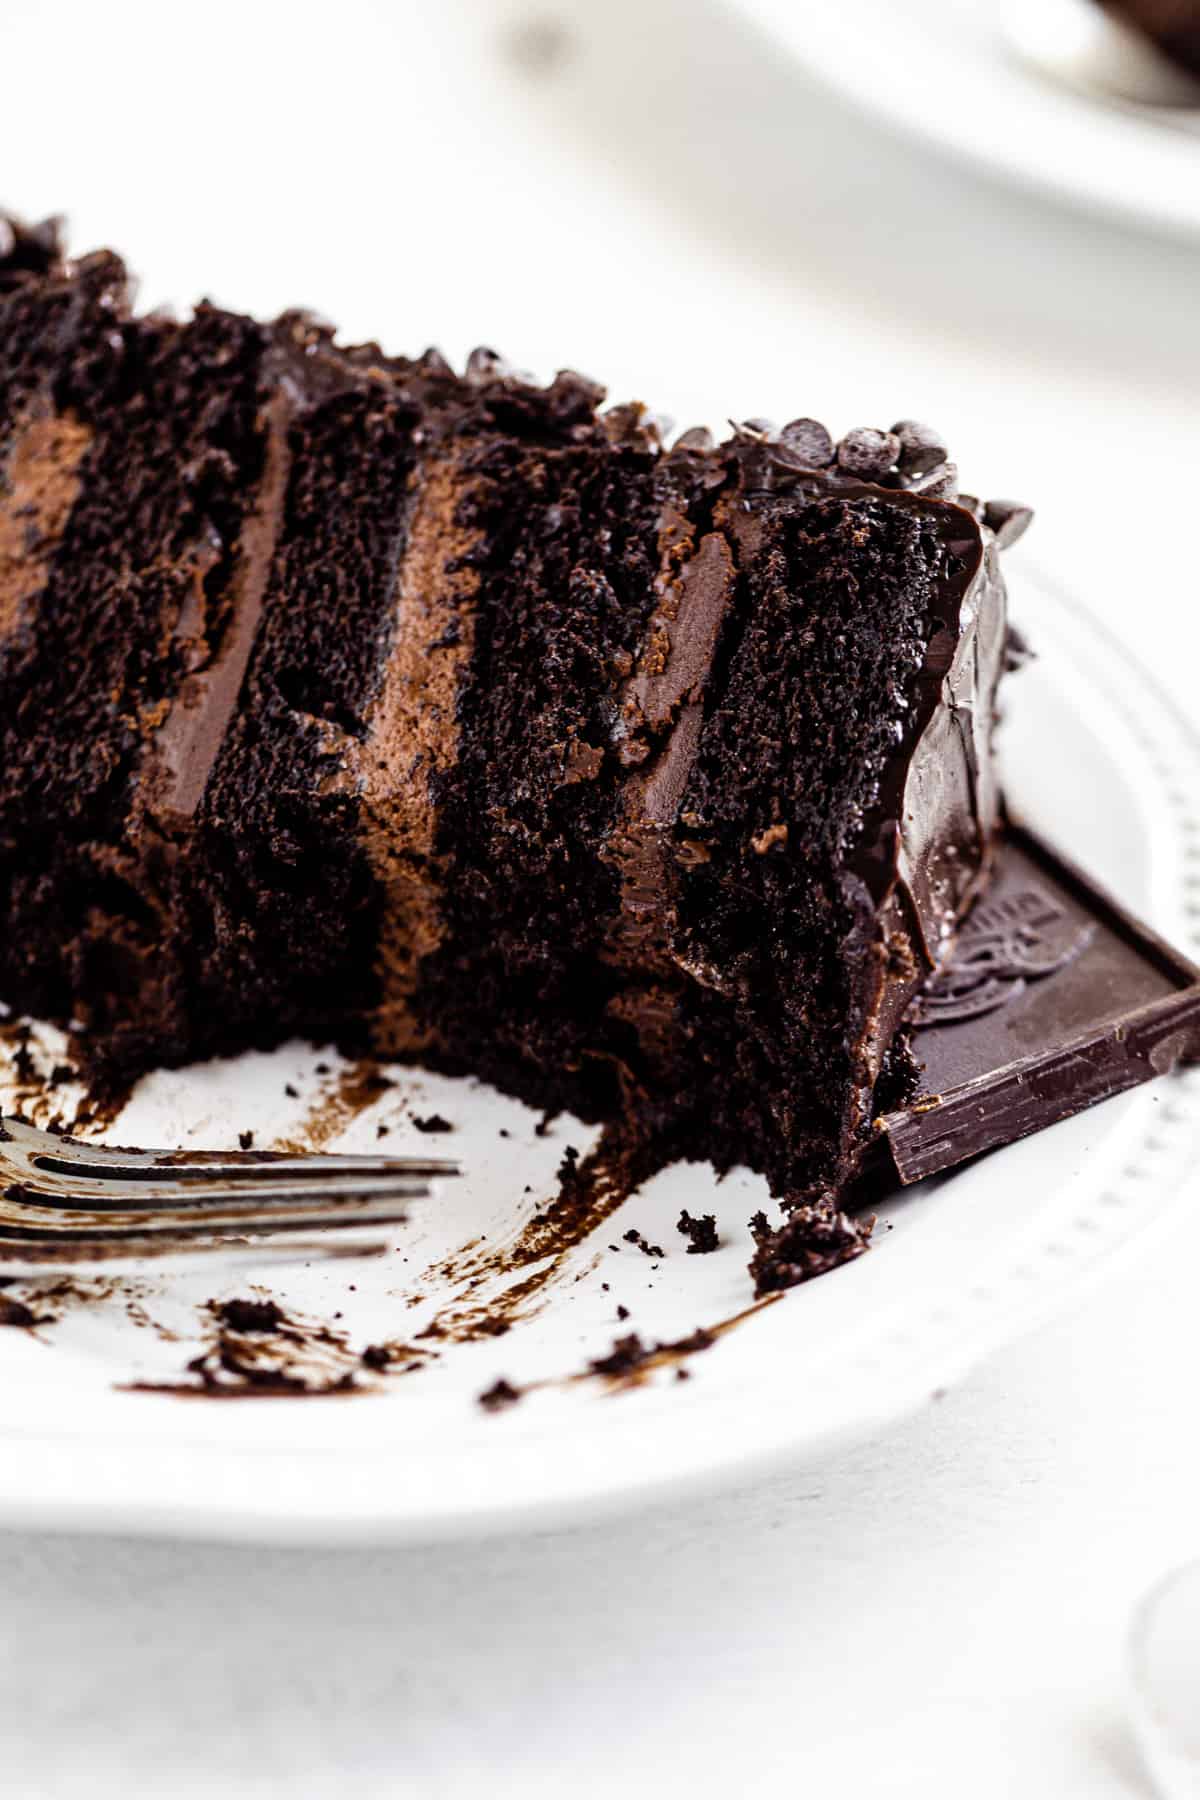 close up of half-eaten chocolate cake on a white plate